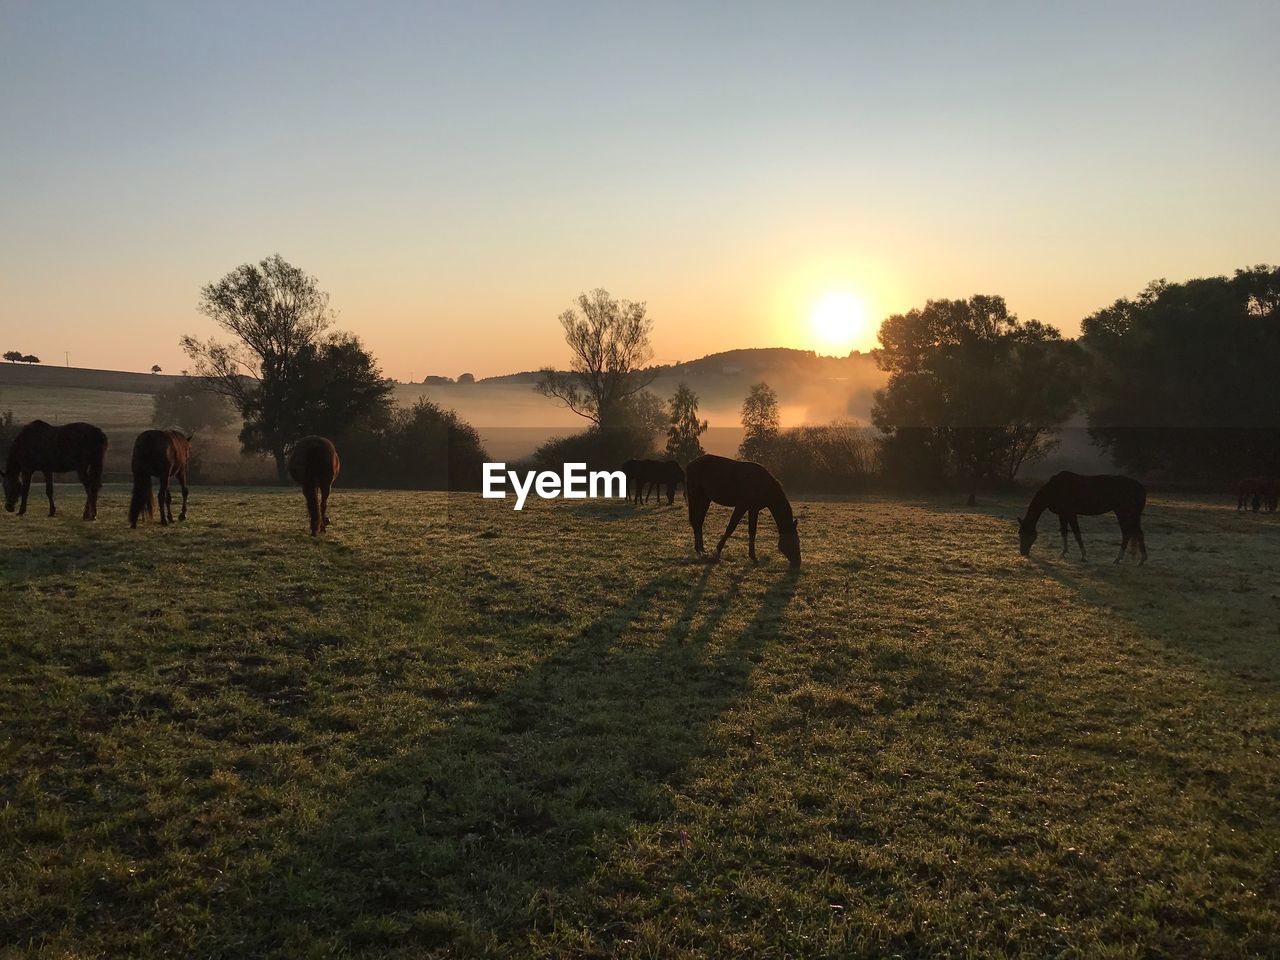 View of horses on field against sky during sunset